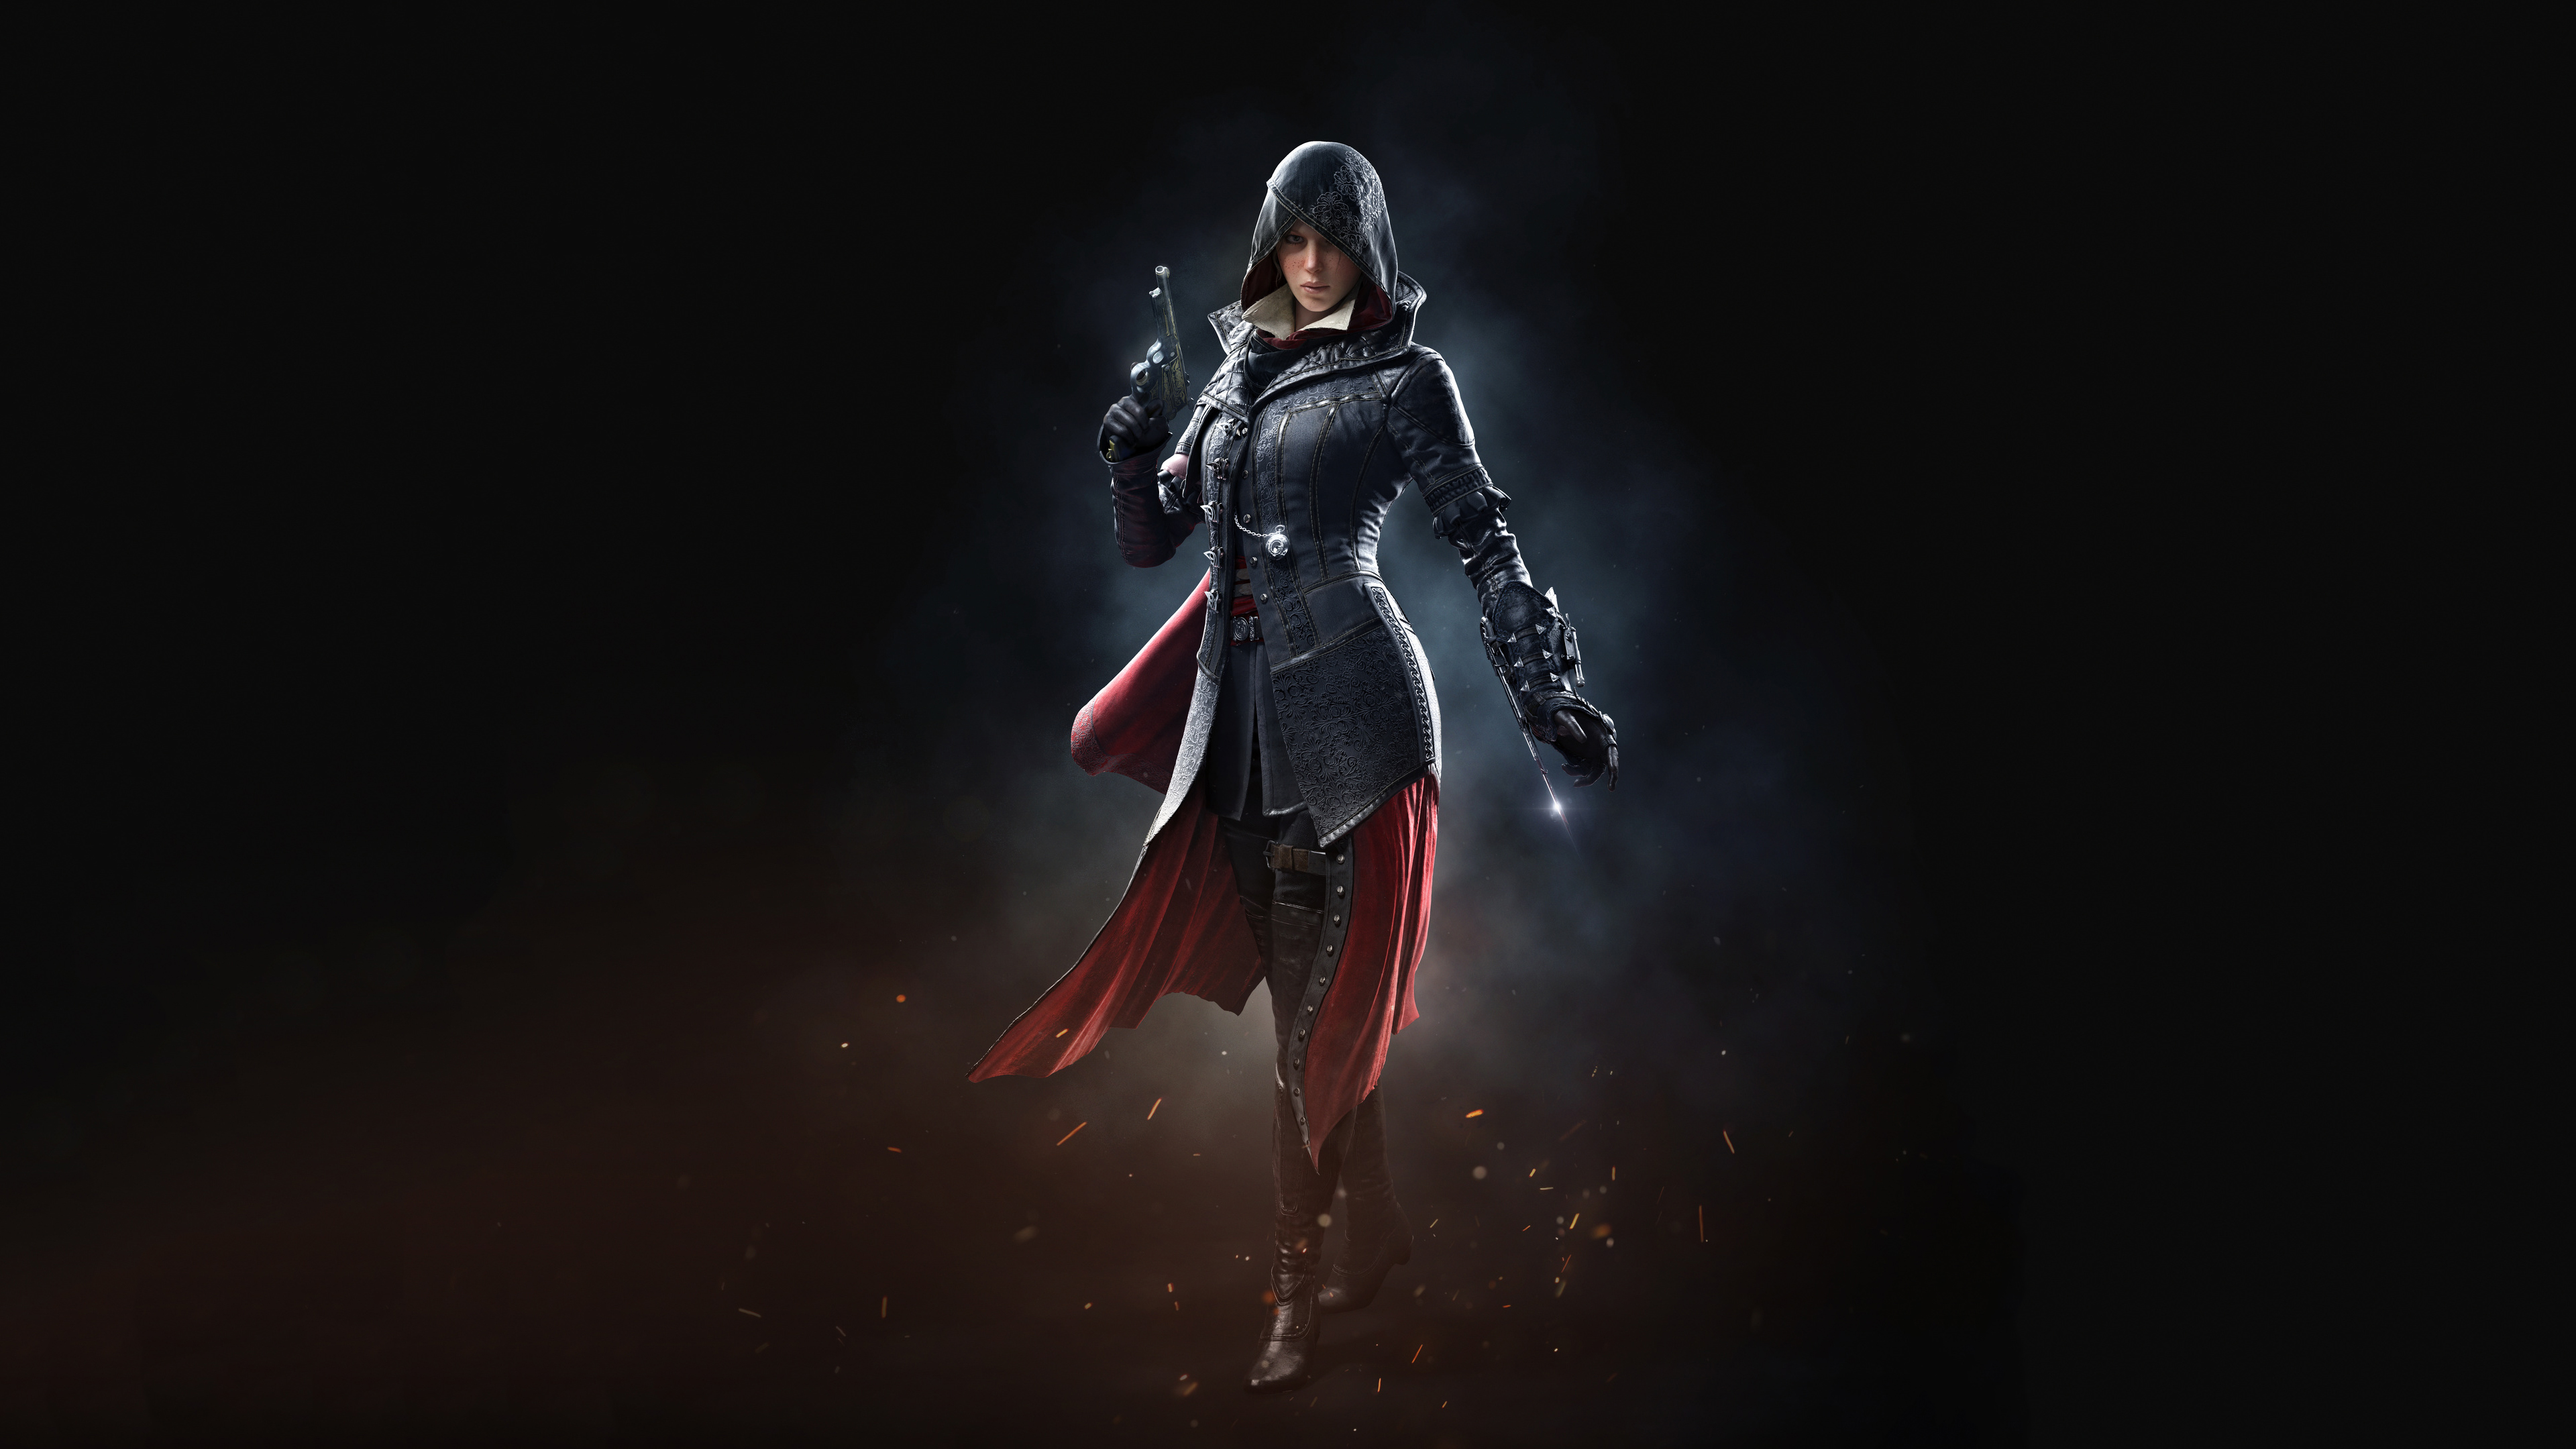 assassin's creed, video game, assassin's creed: syndicate, evie frye